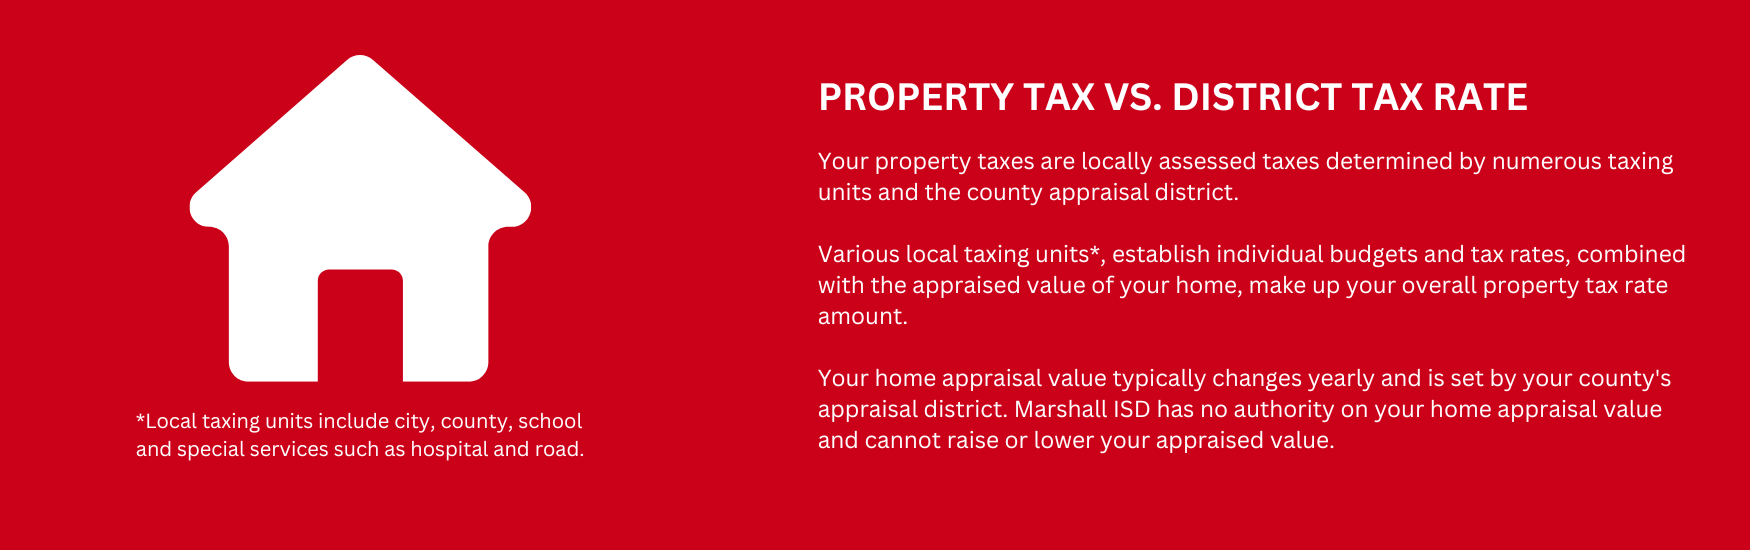 property v district tax rate